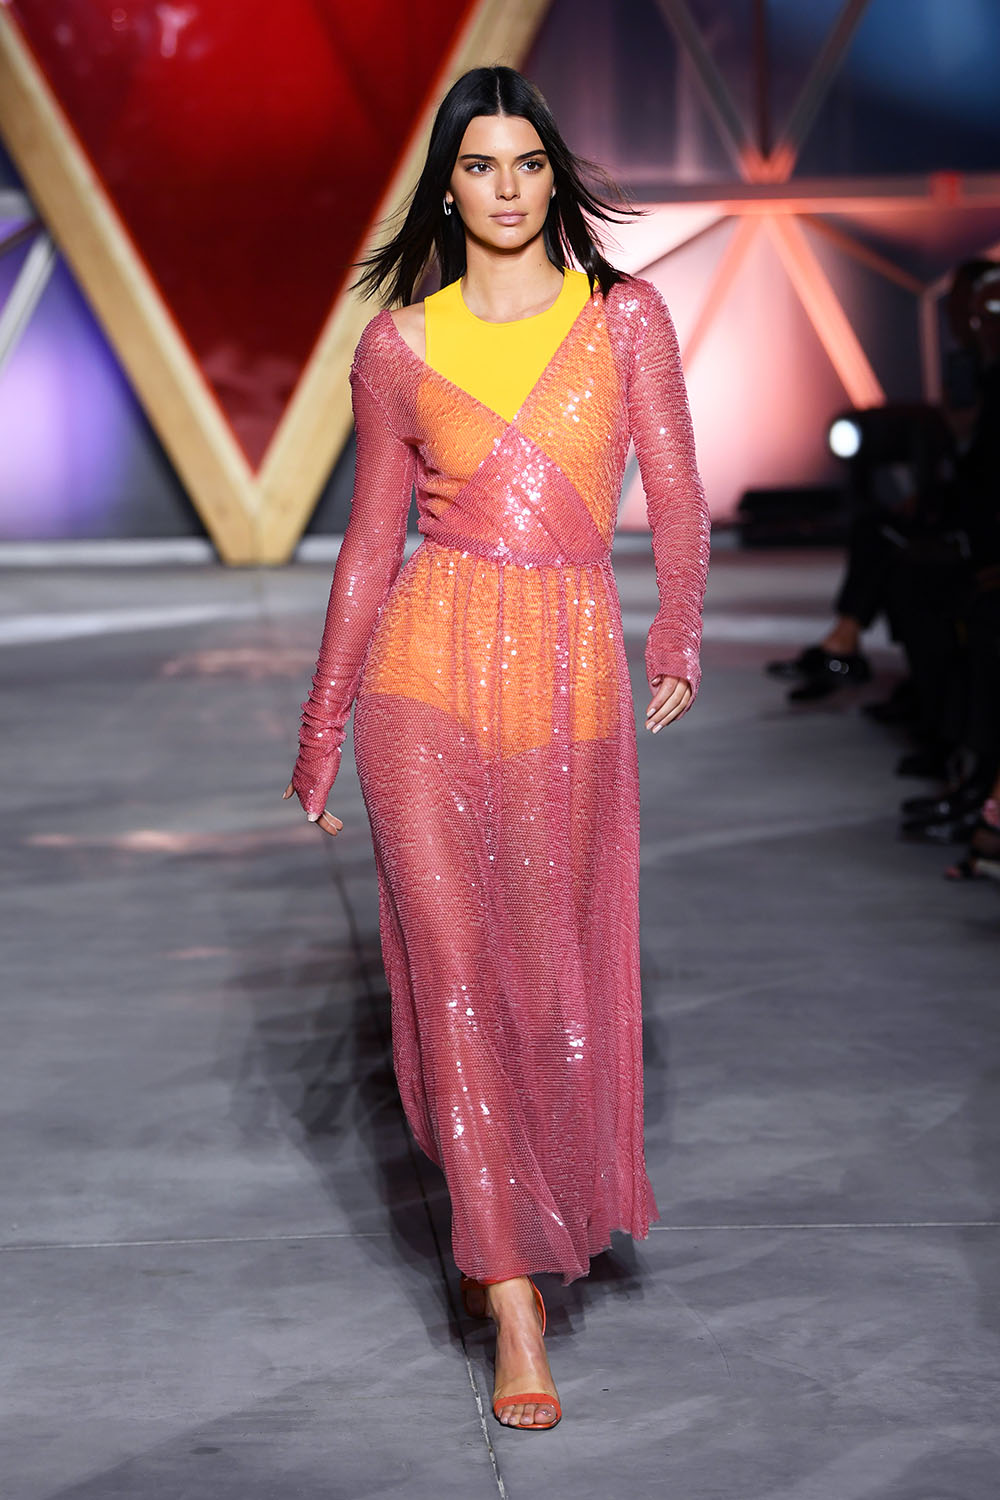 Kendall Jenner on the catwalk
Fashion For Relief, 70th Cannes Film Festival - 21 May 2017
Fashion show and auction launching Diesel's Child At Heart collection - a collaboration with Fashion For Relief charity -
 to raise money for Save The Children